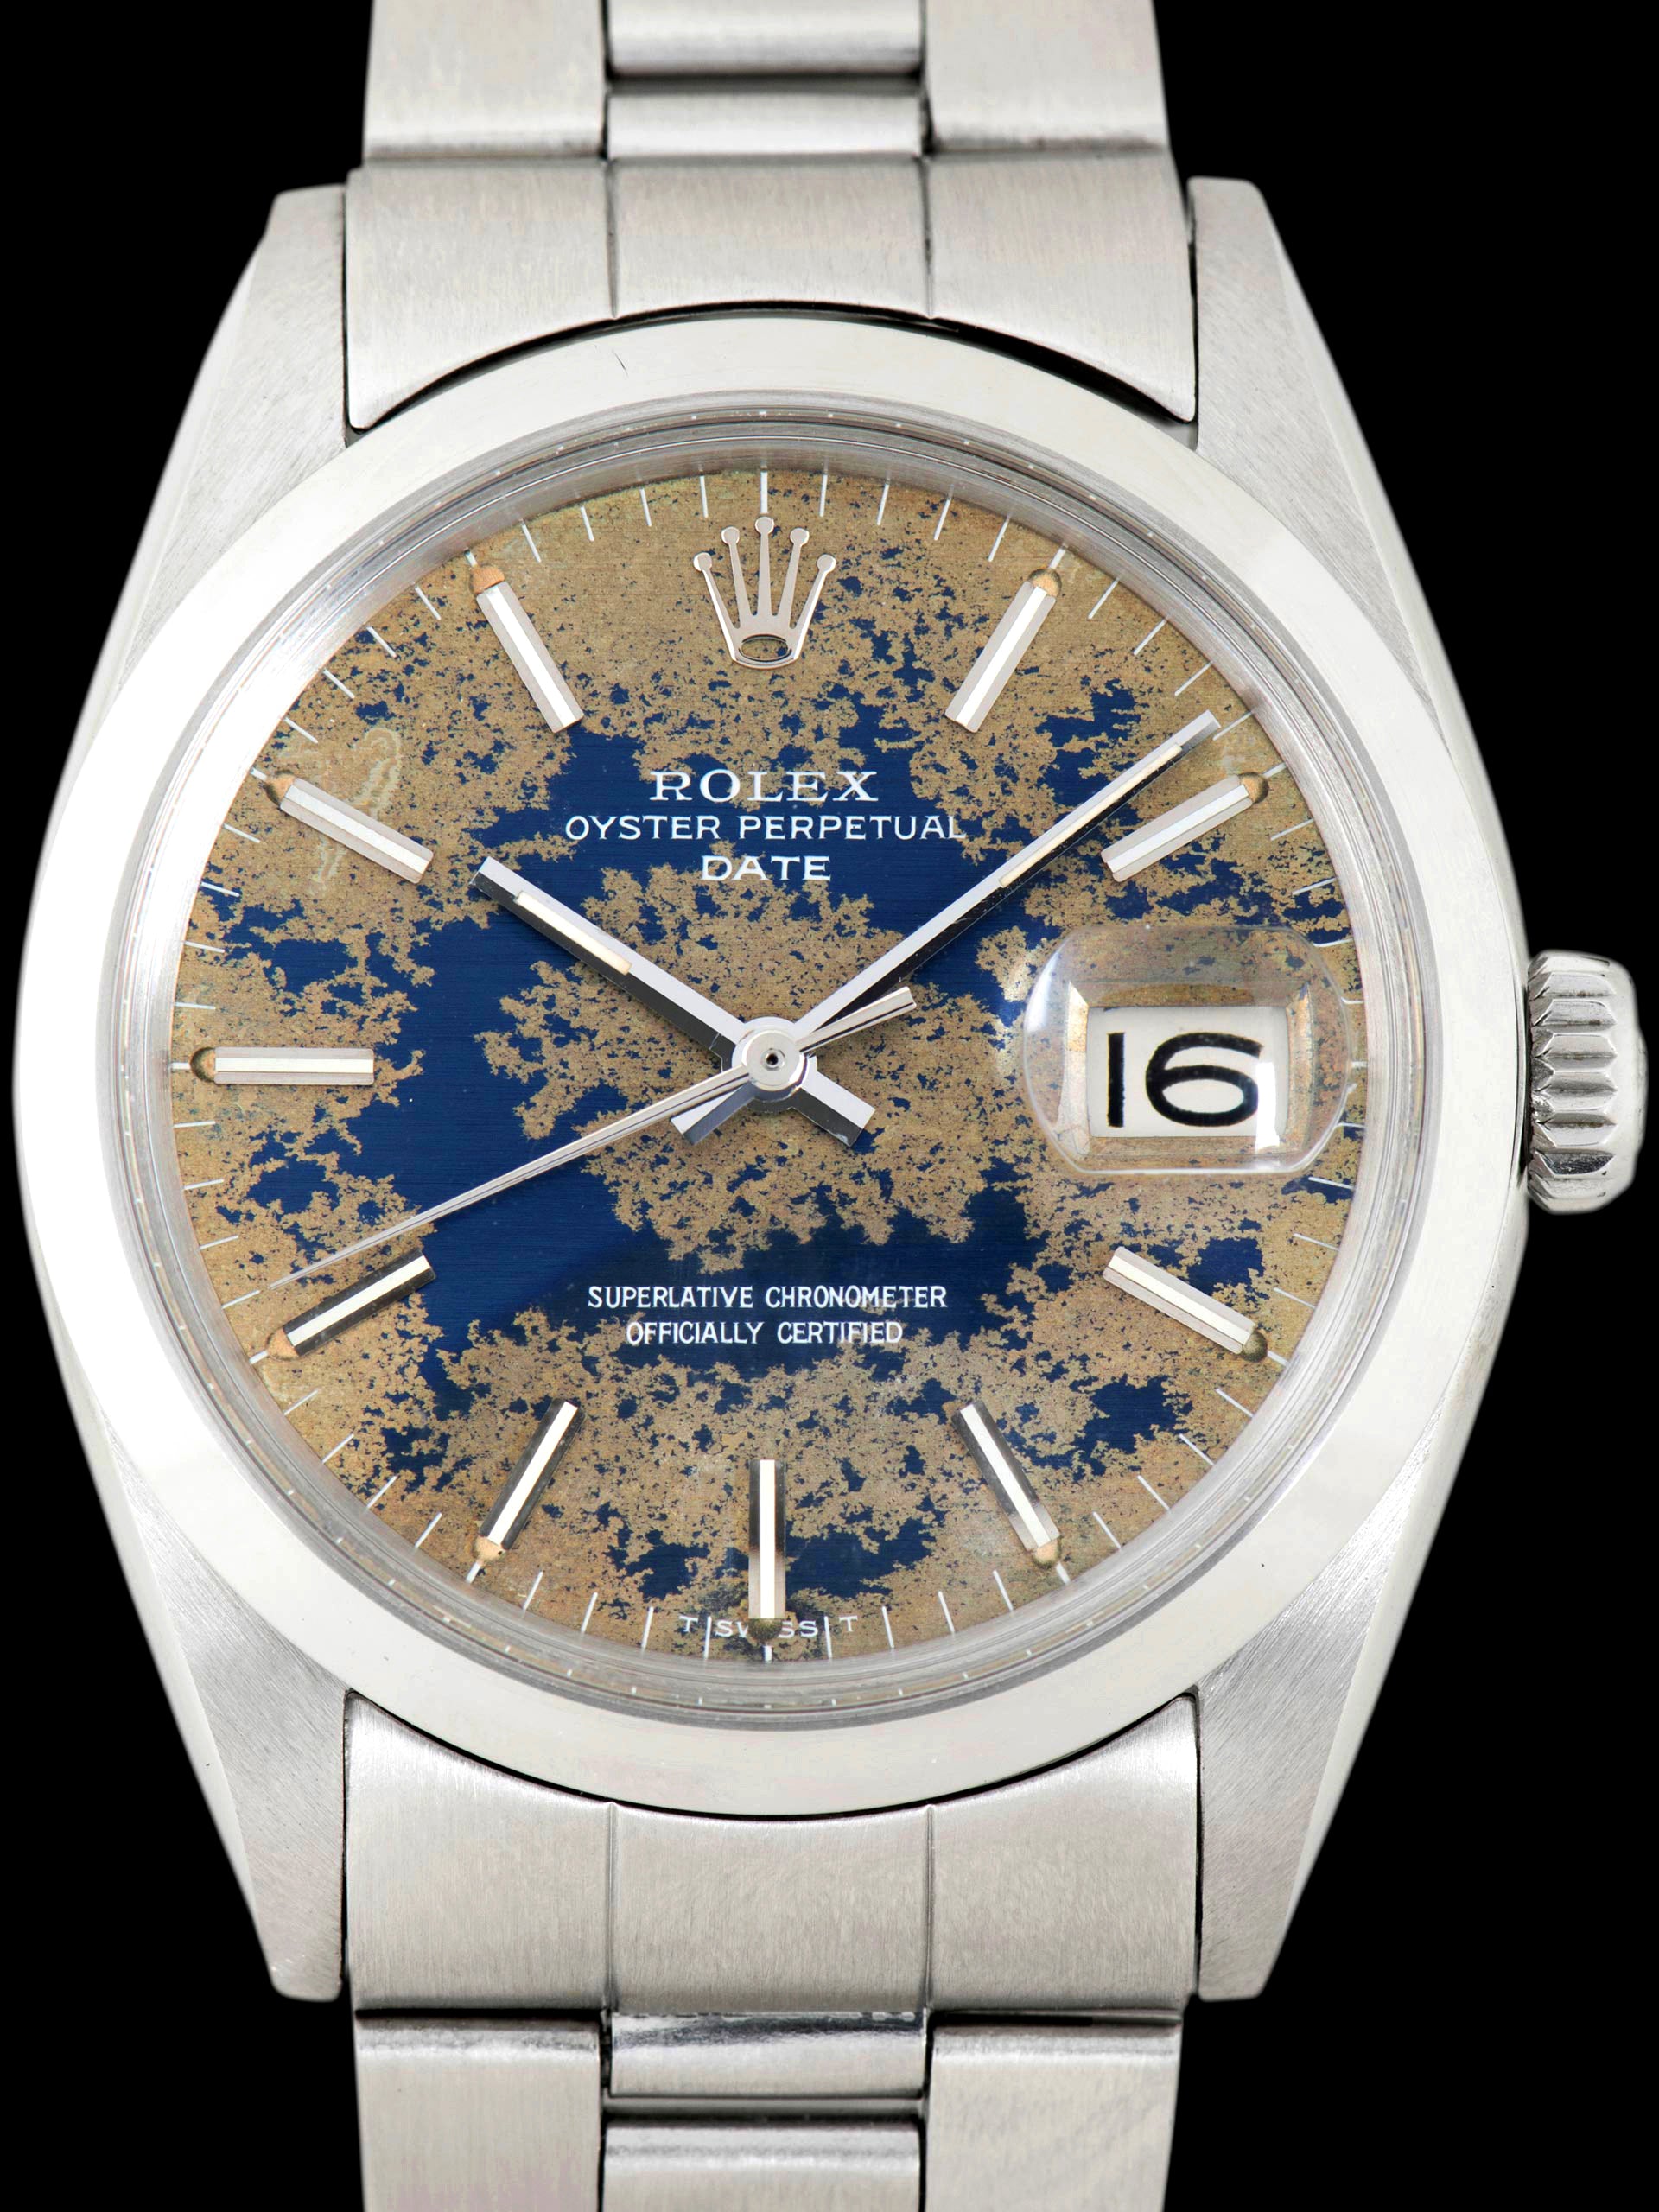 Tropical 1969 Rolex Oyster-Perpetual Date (Ref. 1500) "Blue Camo" Dial W/ Double Punched Papers